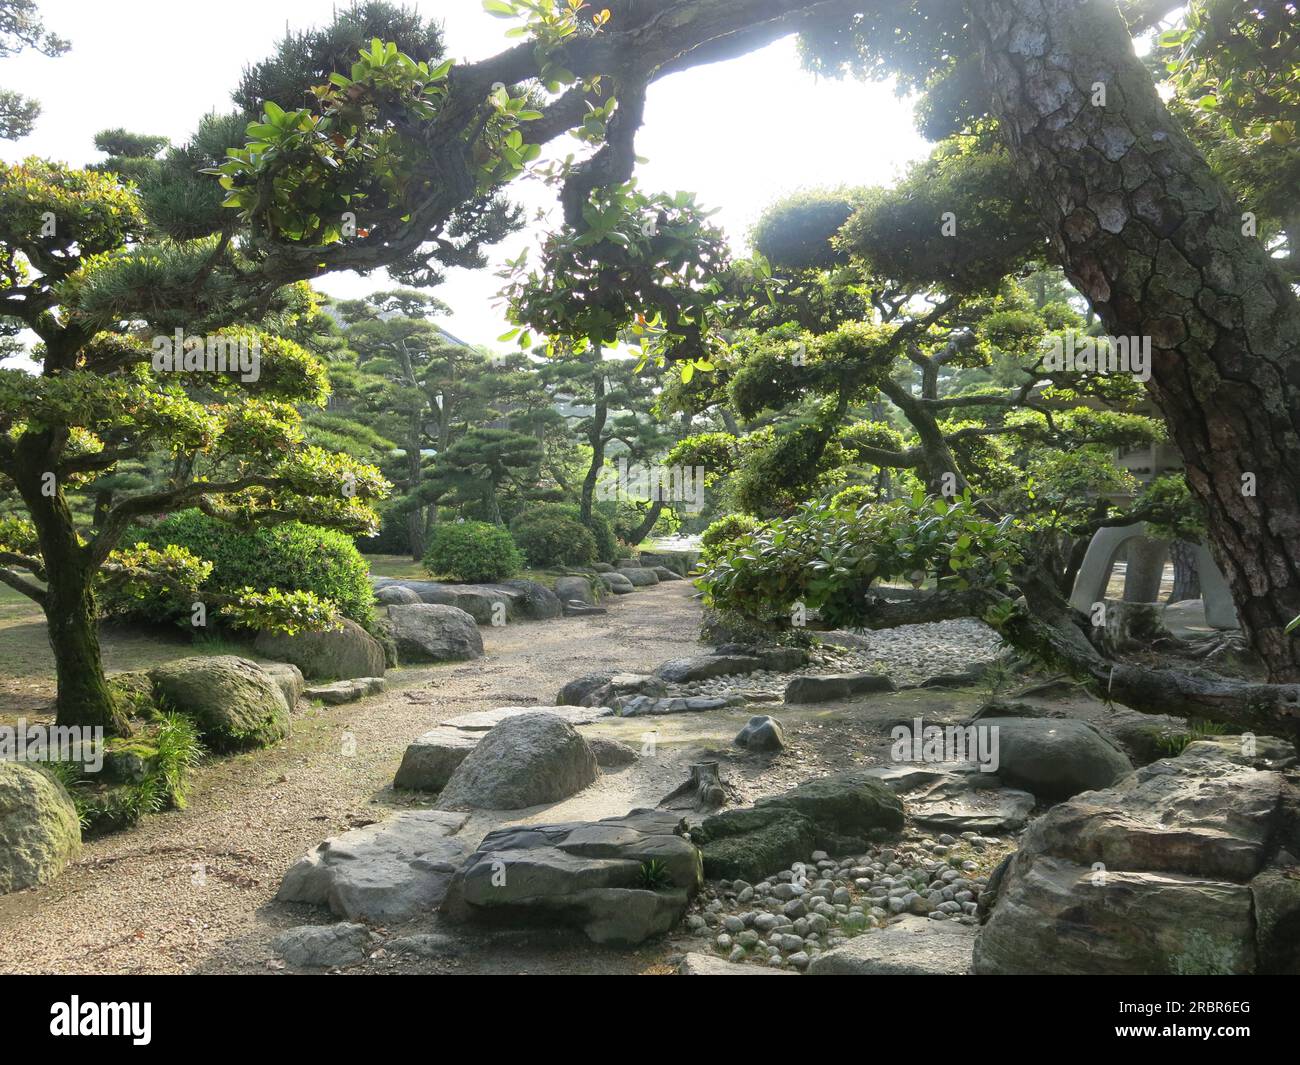 View of the beautiful grounds of Tamamo Park at the port of Takamatsu with all the Japanese elemts of pine trees, stone lanterns, pebbles & rocks. Stock Photo